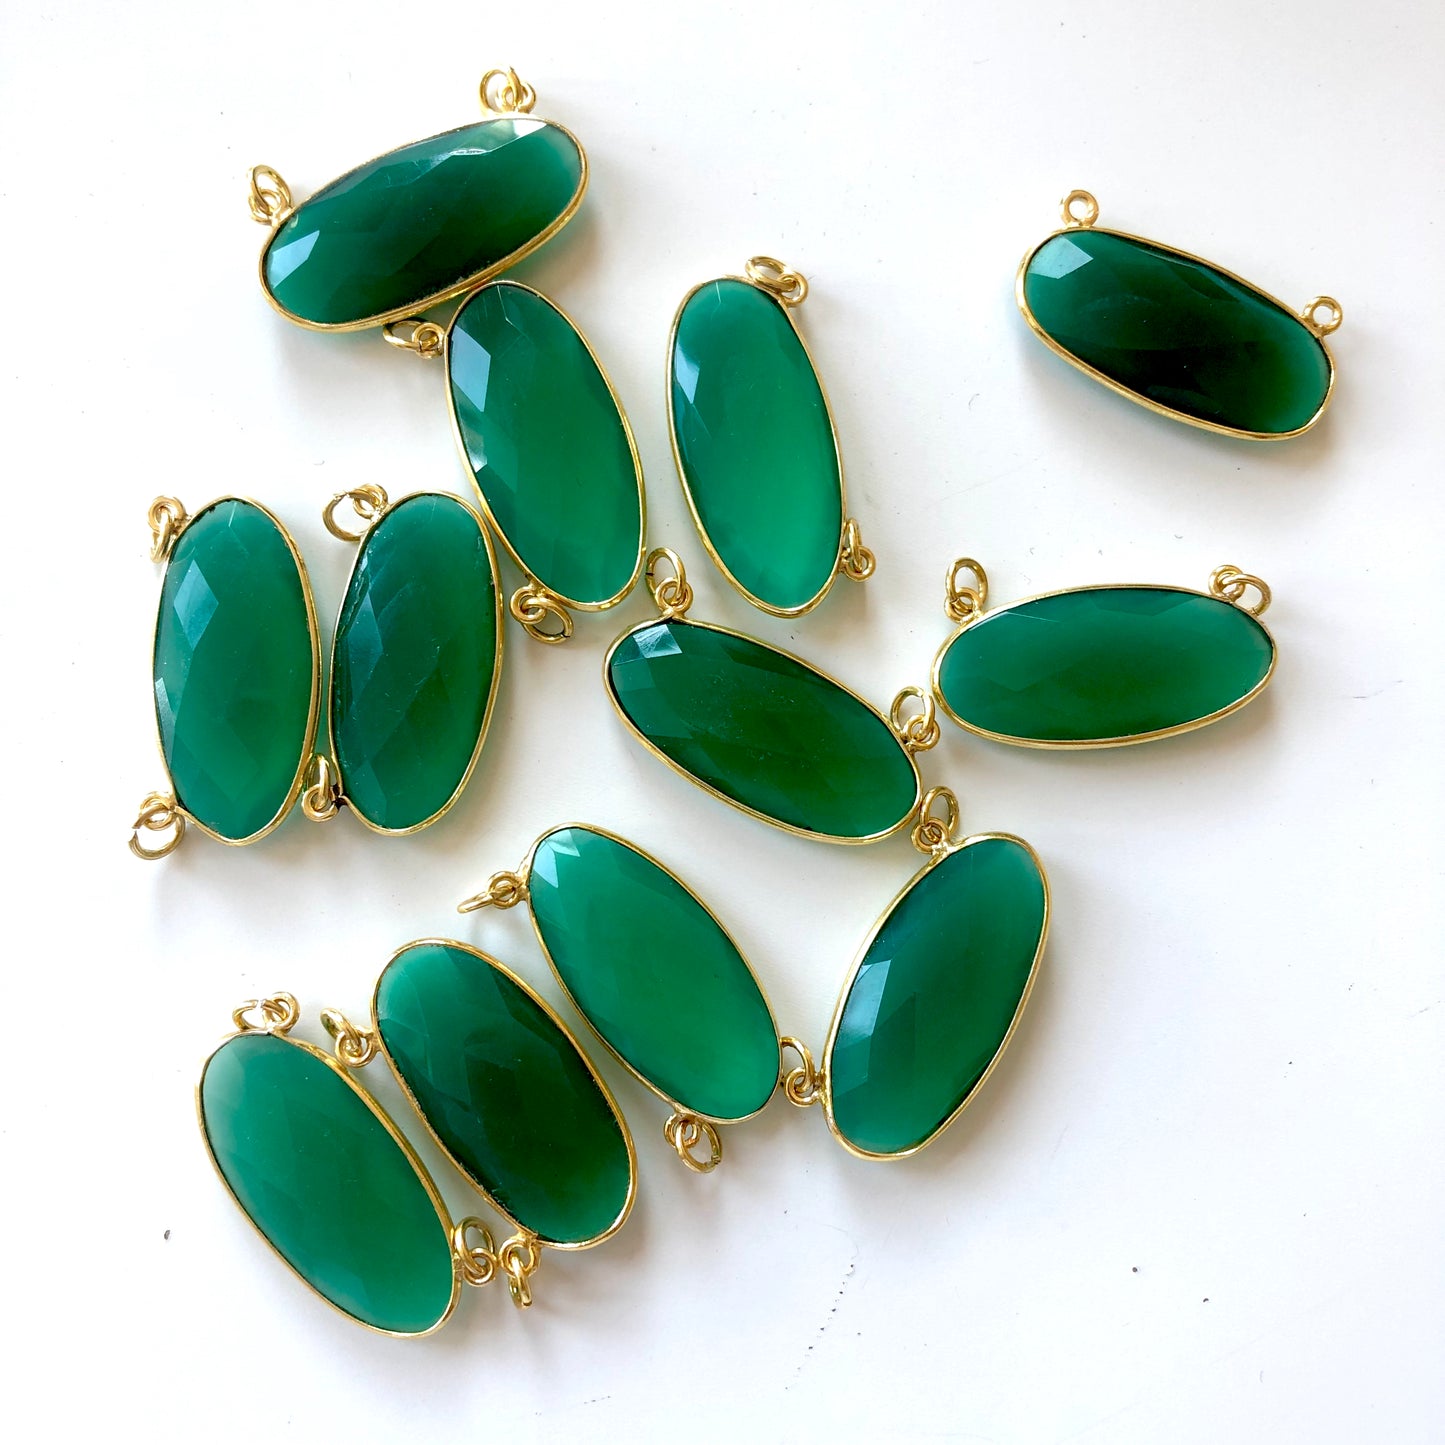 2 Pieces - Gold Plated over Silver Bezel Pendants Green Onyx Oval